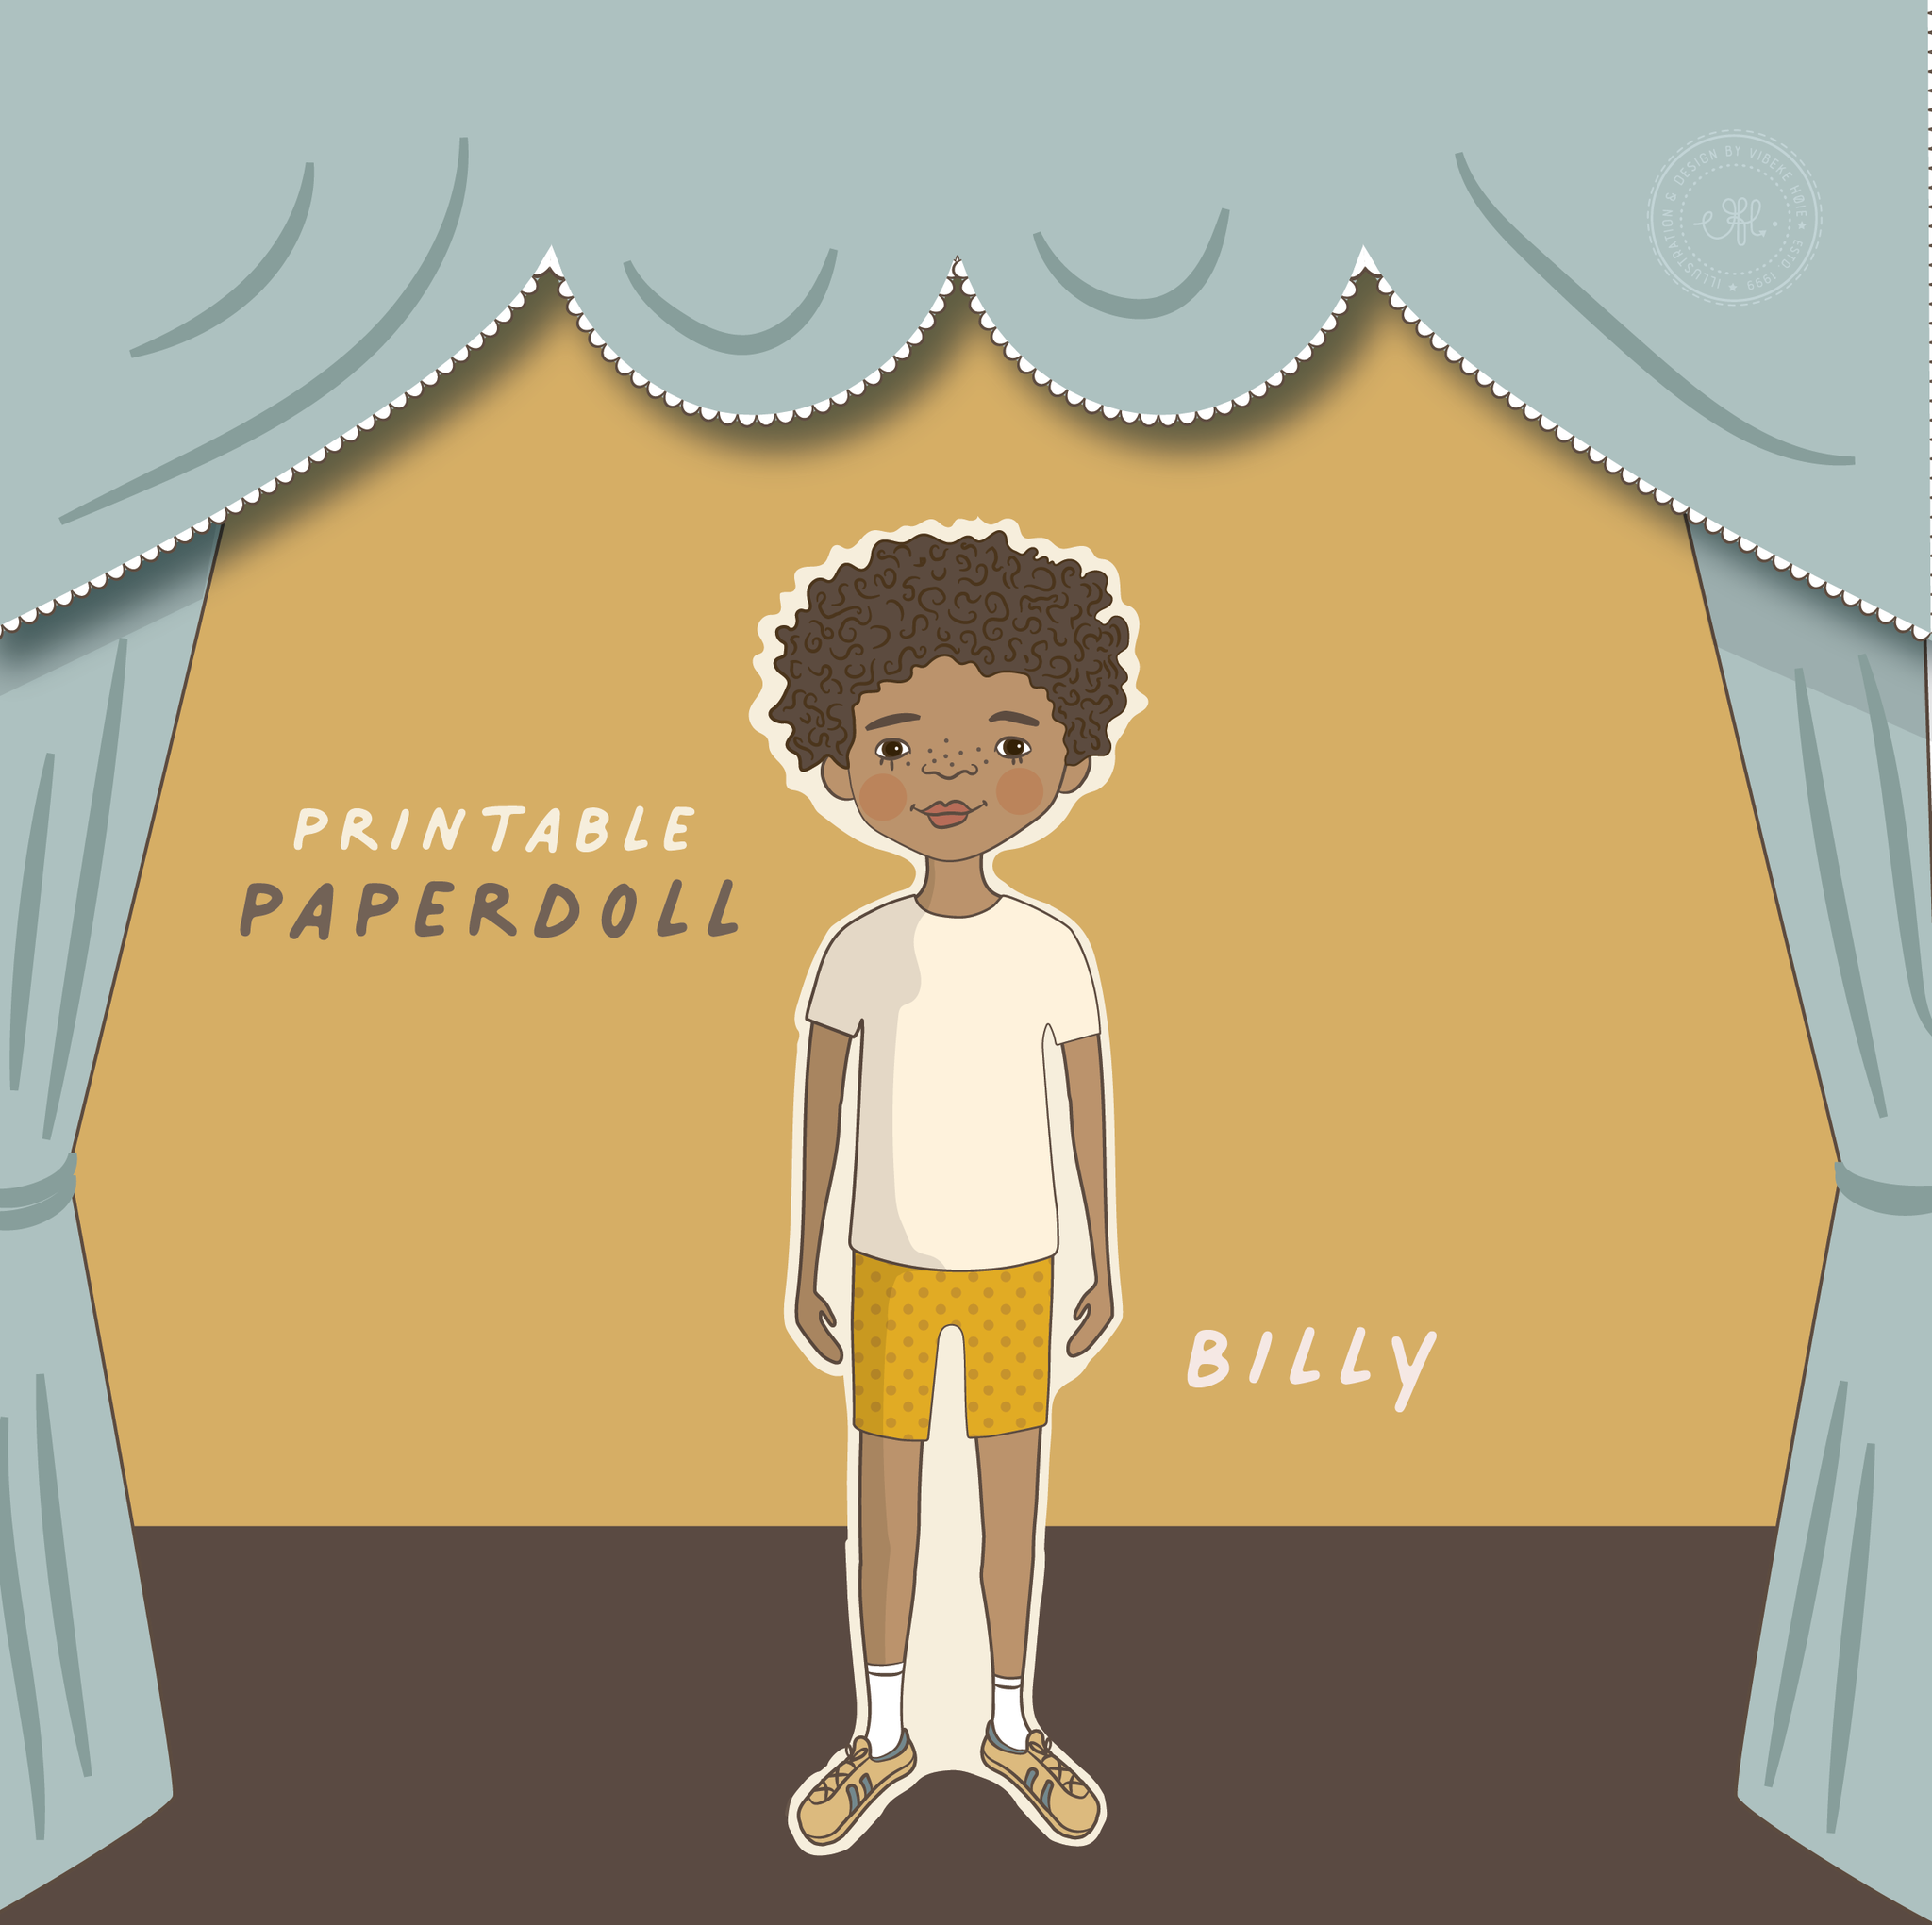 The Paperdoll - Billy